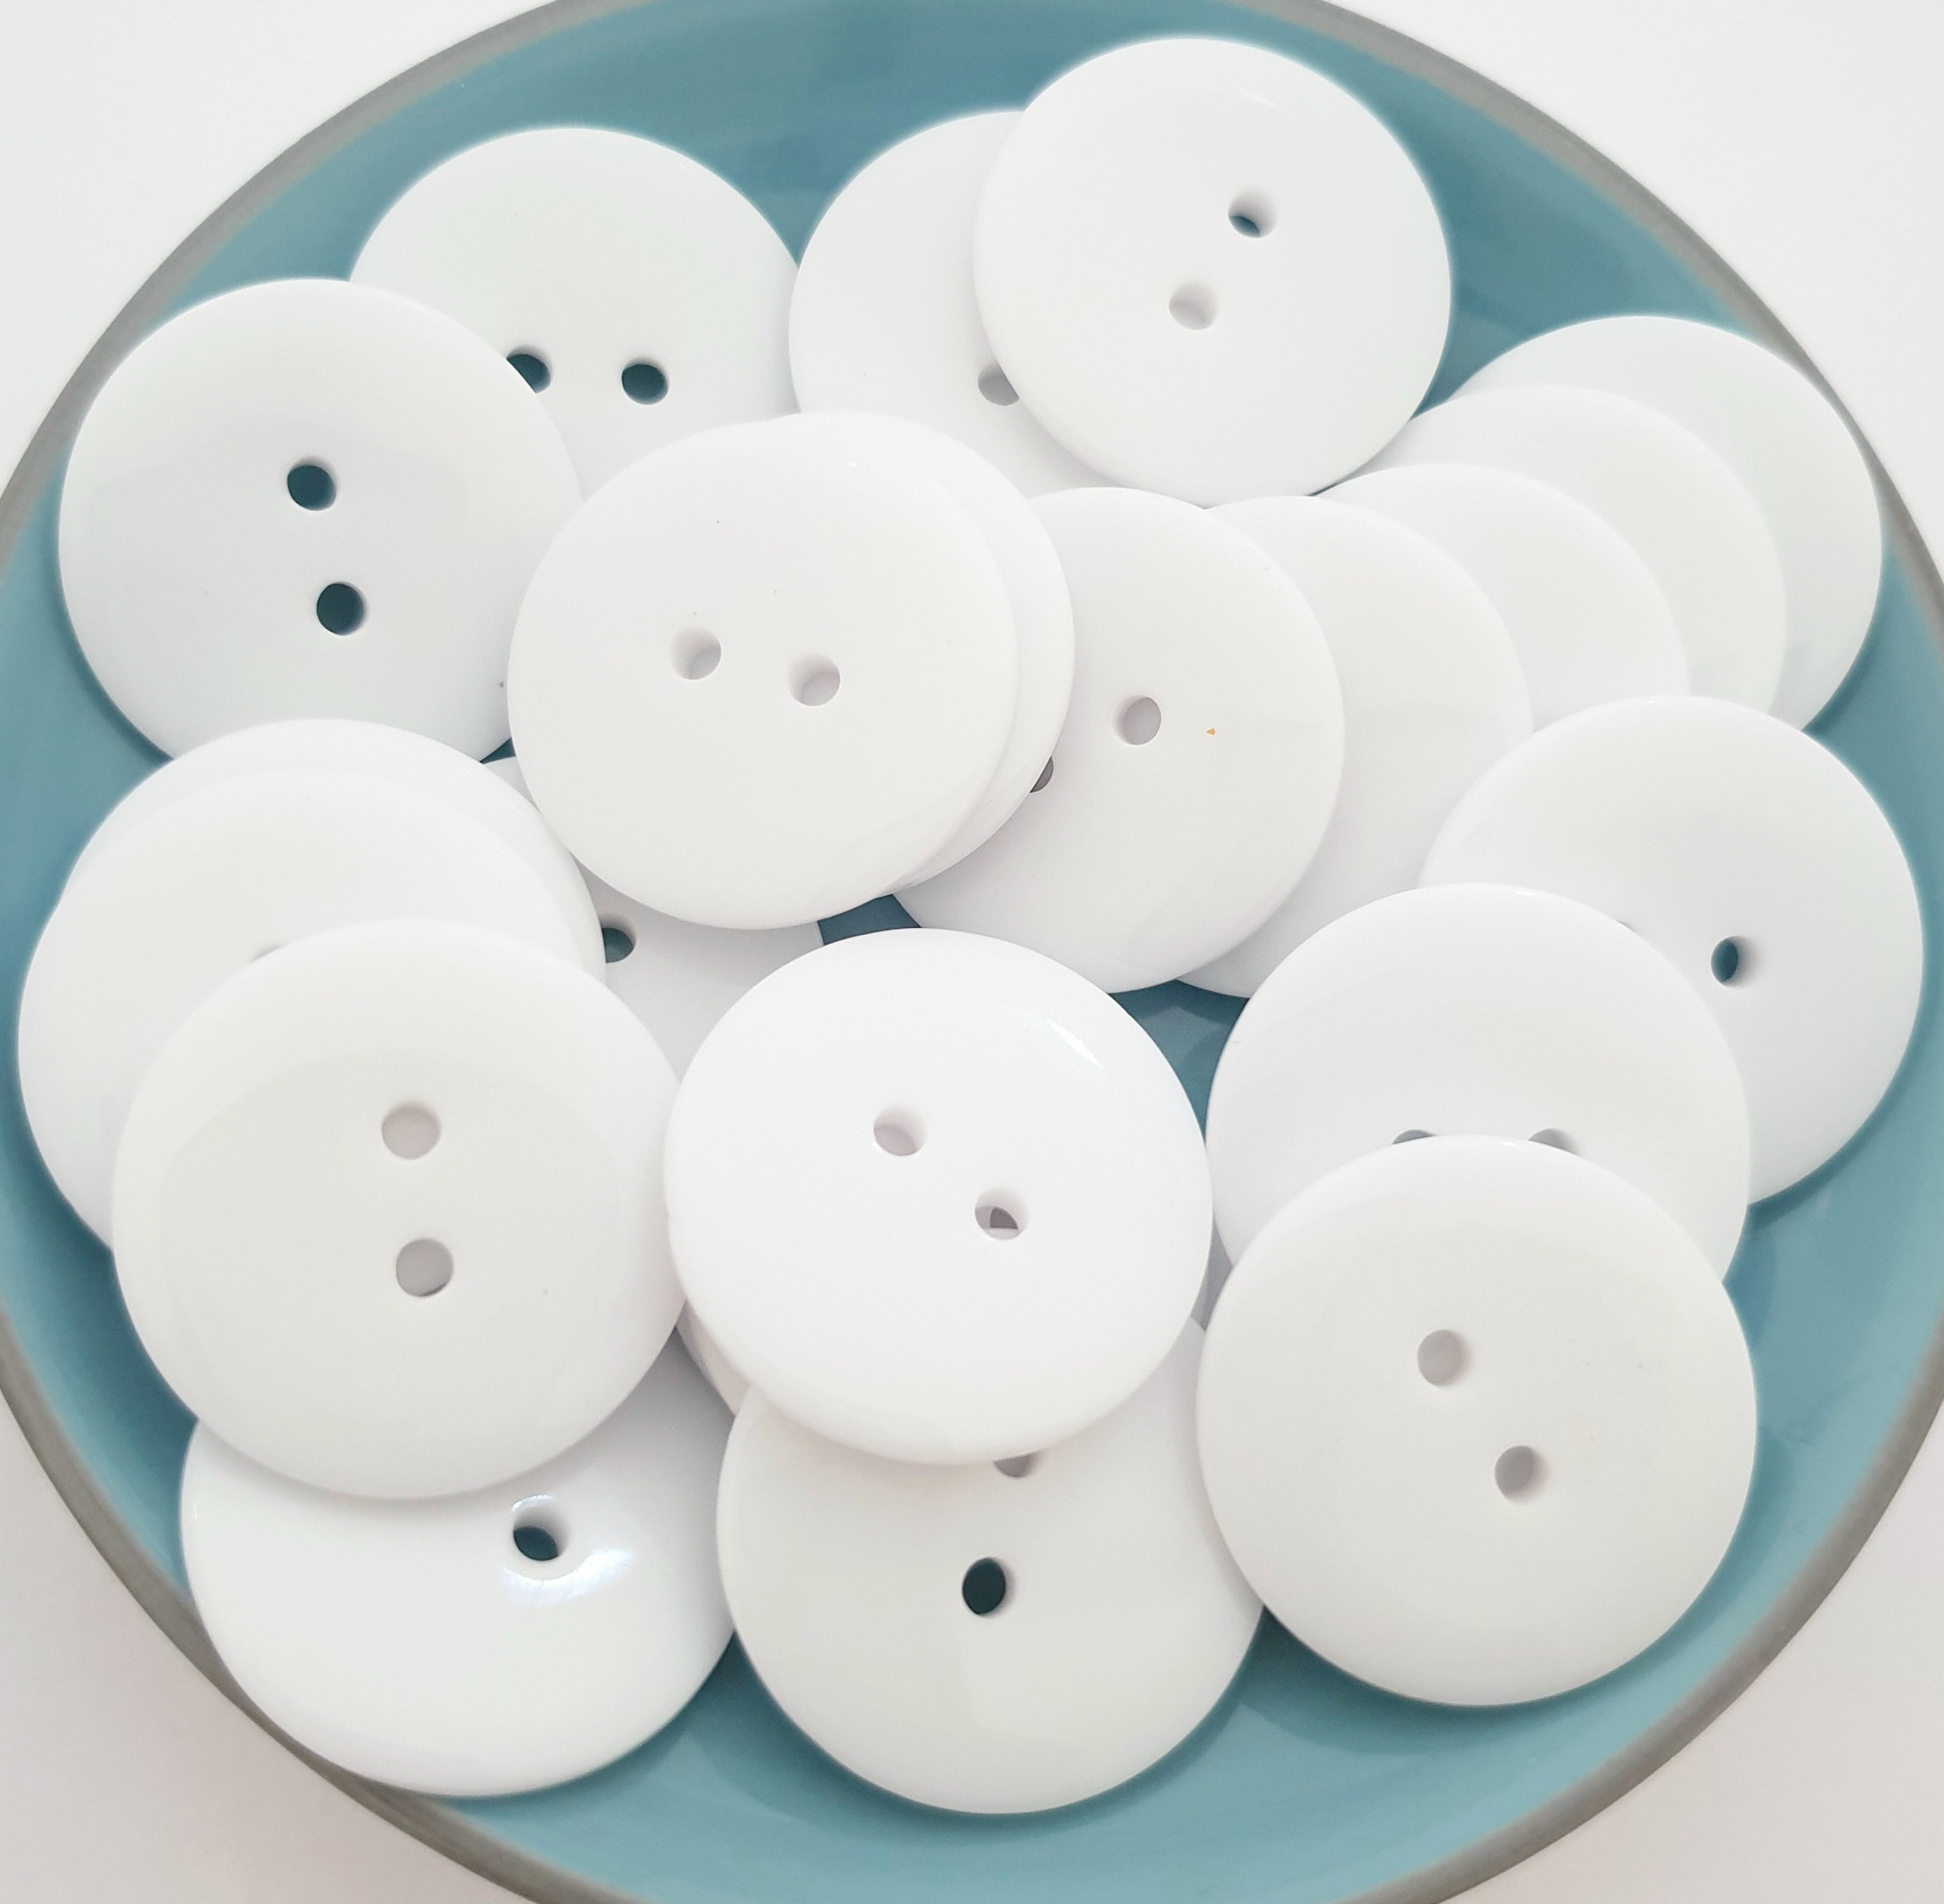 MajorCrafts 24pcs 25mm White 2 Holes Round Large Resin Sewing Buttons